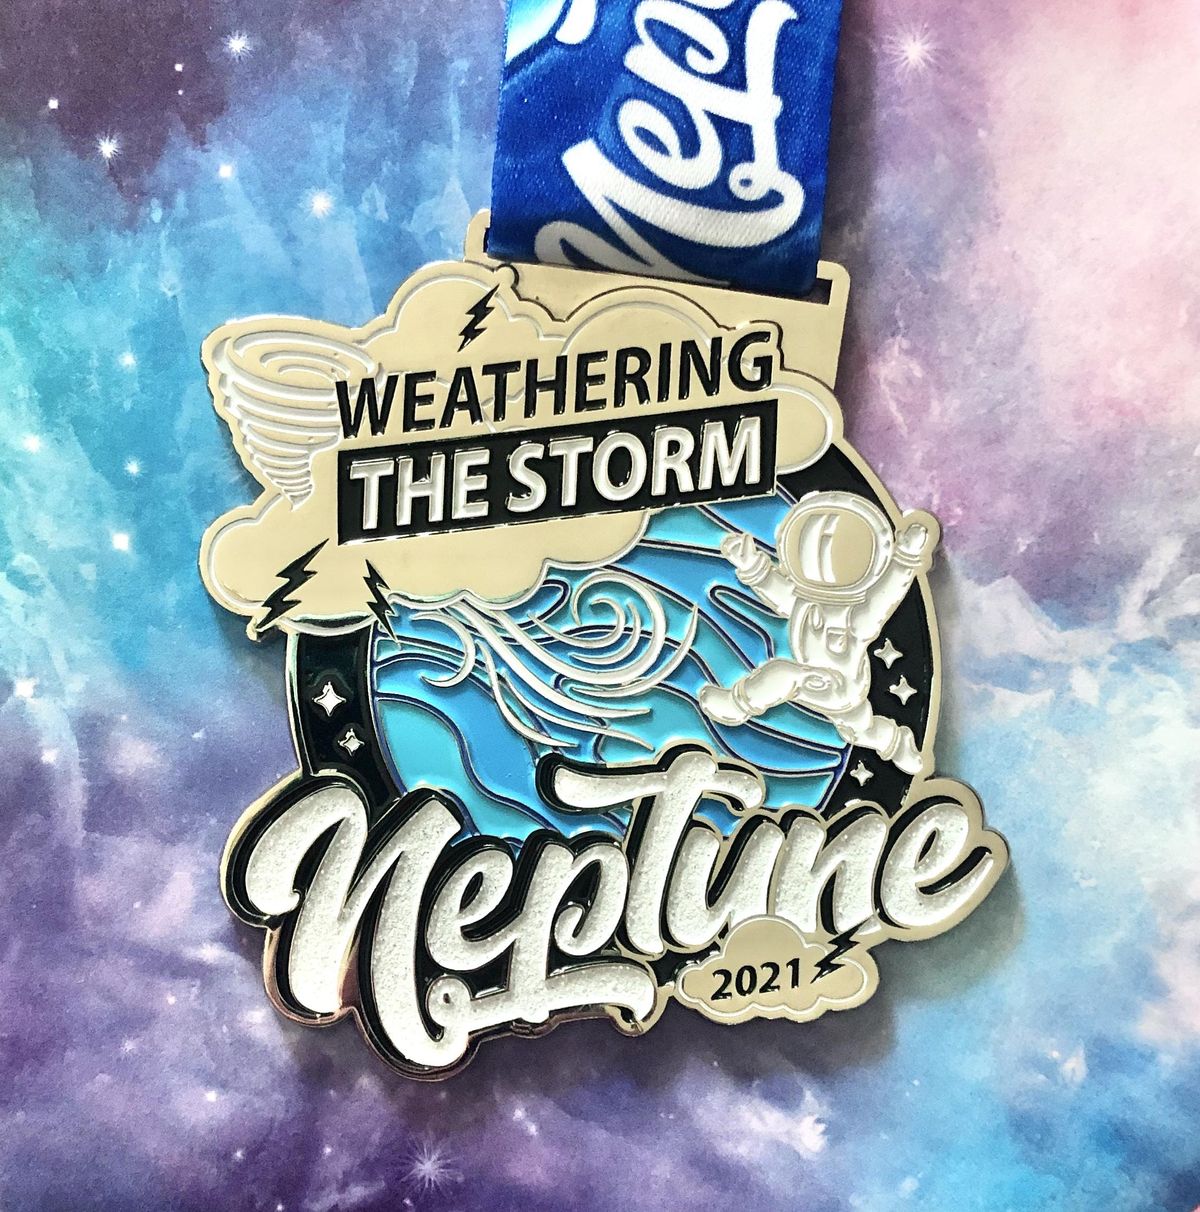 FREE! Neptune Weathering the Storm - Run and Walk Challenge  - Chicago